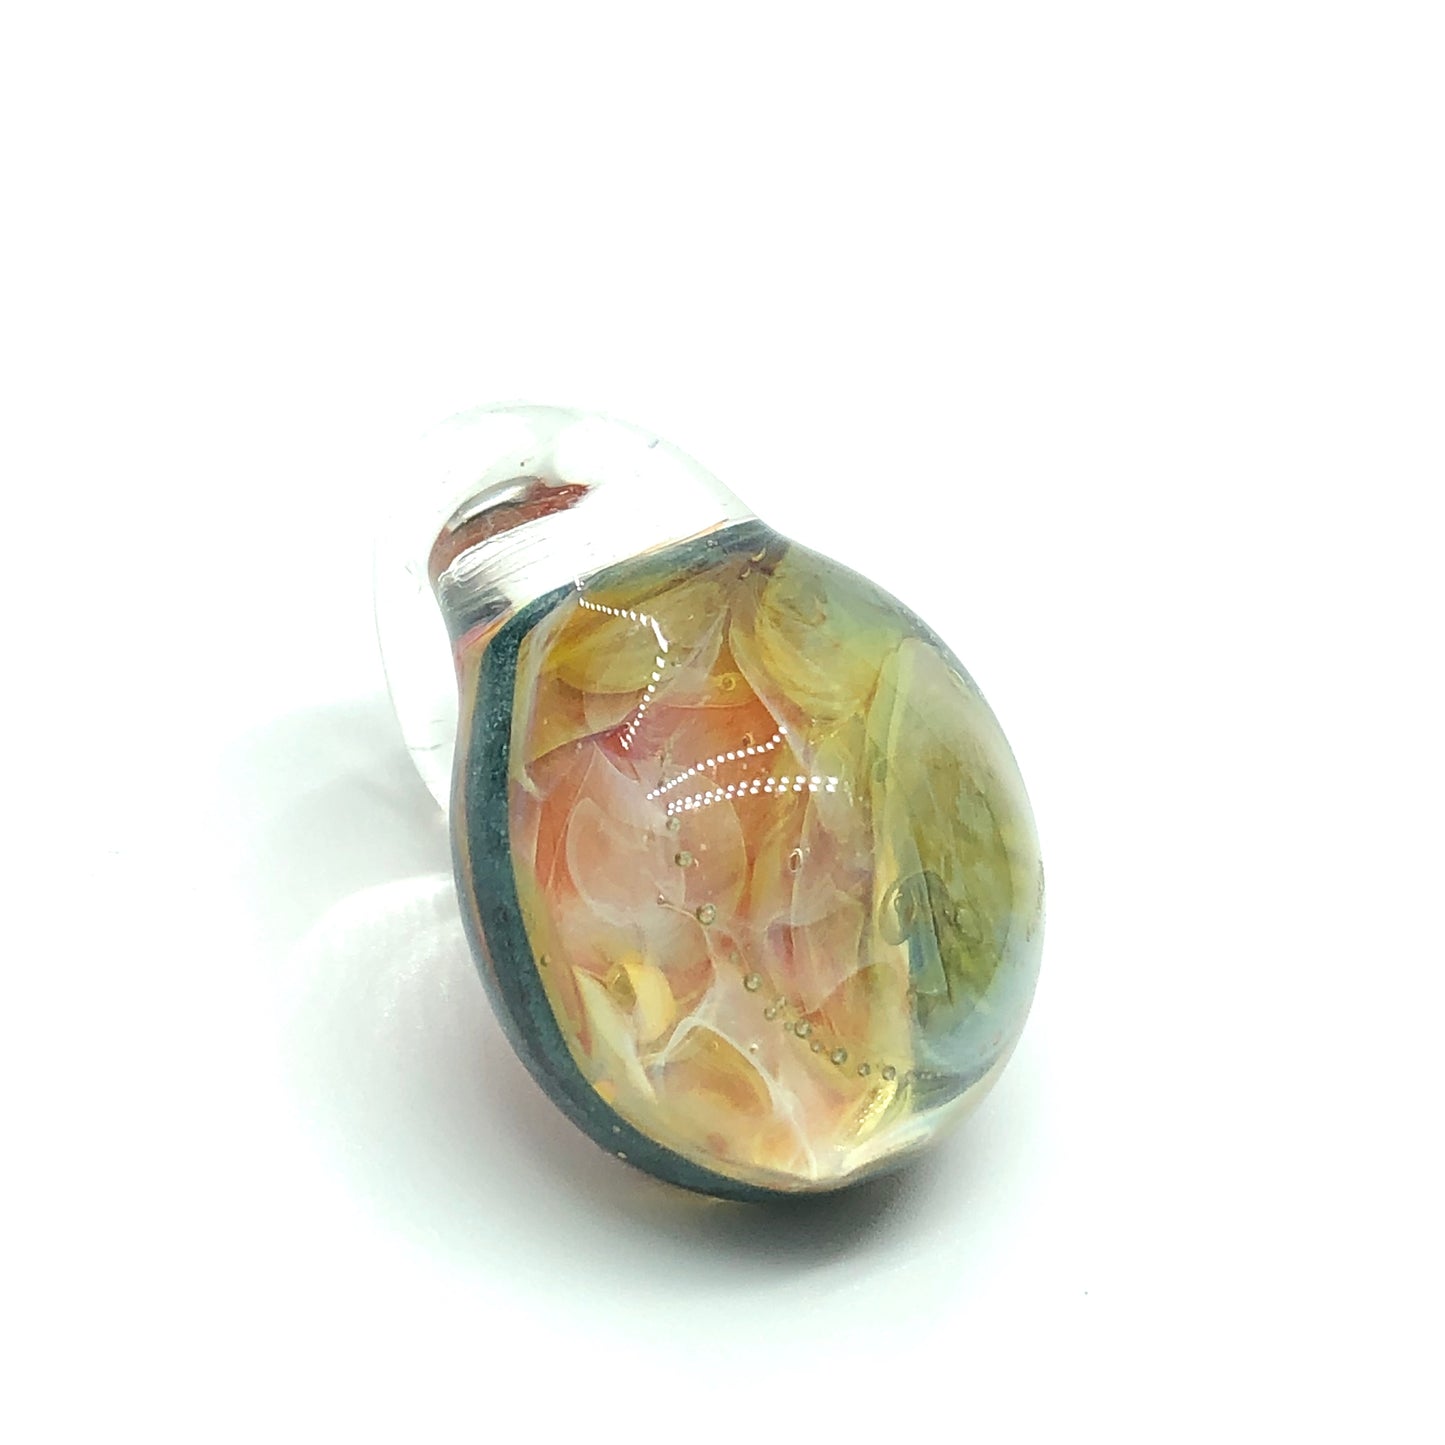 Shop Fashion Jewelry - Womens Shabby Chic HandCrafted Glass Pendant Heirloom Rose Design - Blingschlingers Estate Jewelry Online